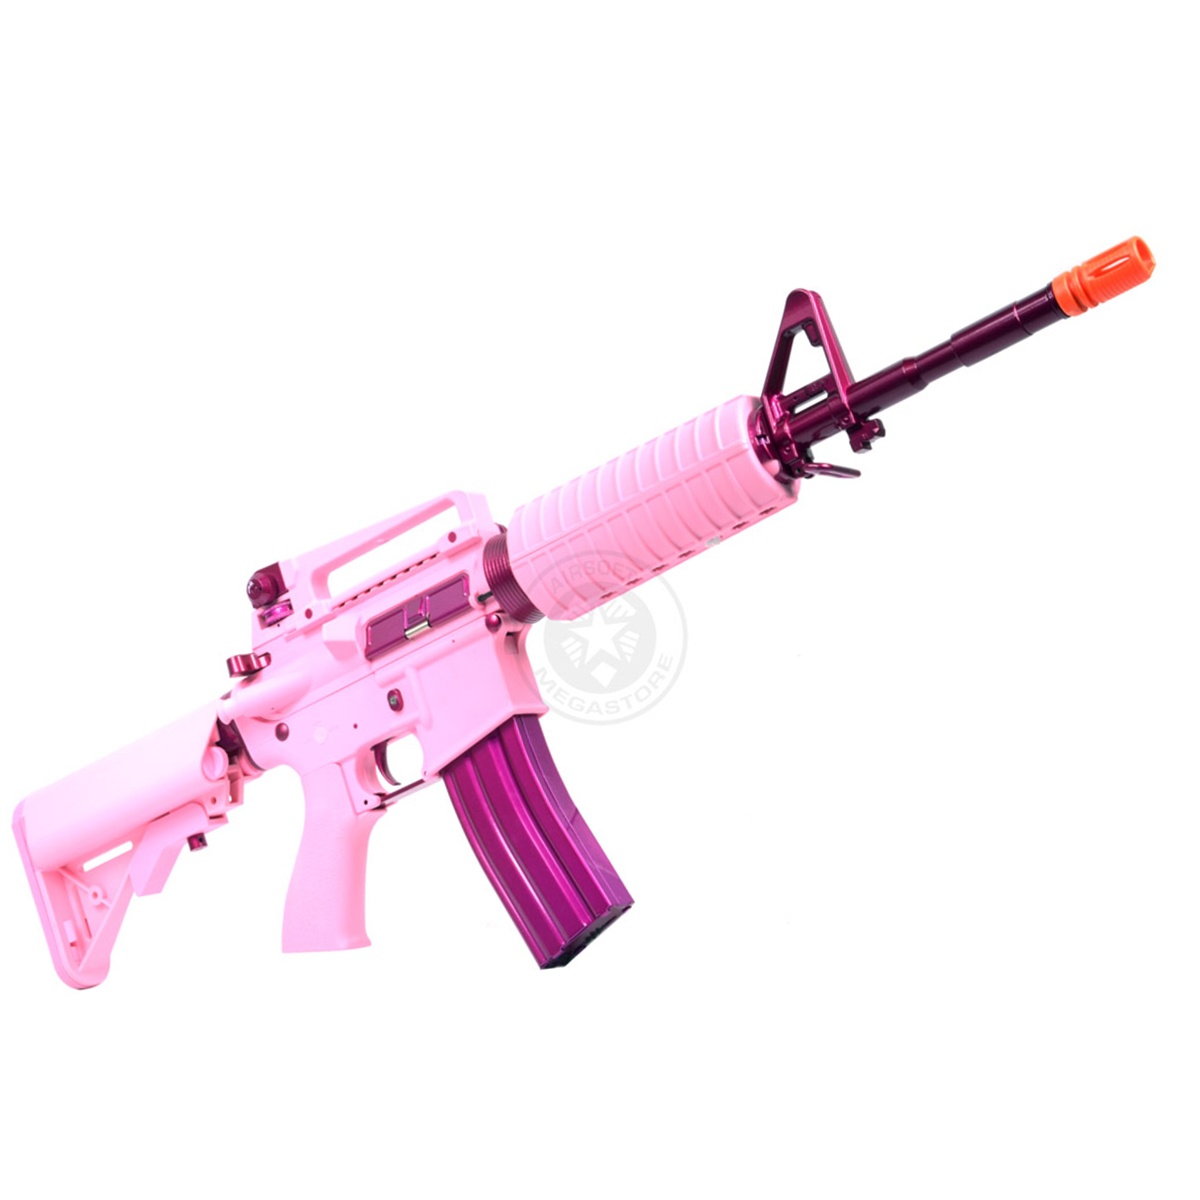 G&G "Femme Fatale" Special Edition Carbine Combat Machine Airsoft AEG Rifle Pink 